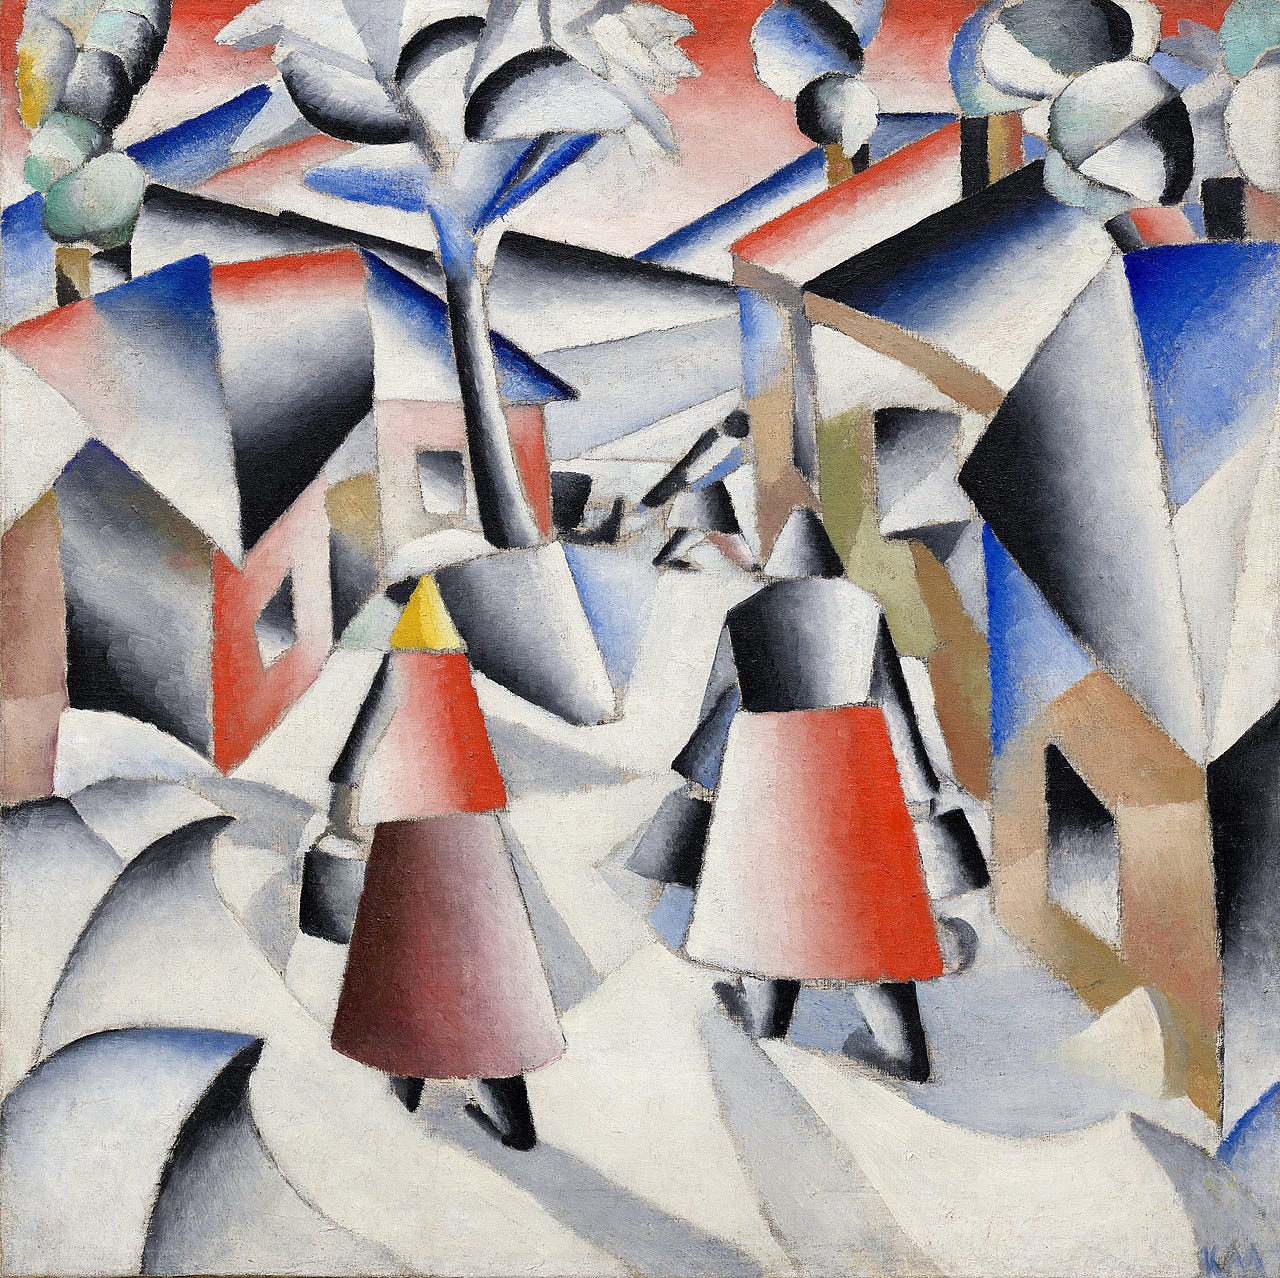 Kazimir Malevich, Morning in the Village after Snowstorm, 1912. Oil on canvas, 31 1/2 x 31 1/2 inches (80 x 80 cm)